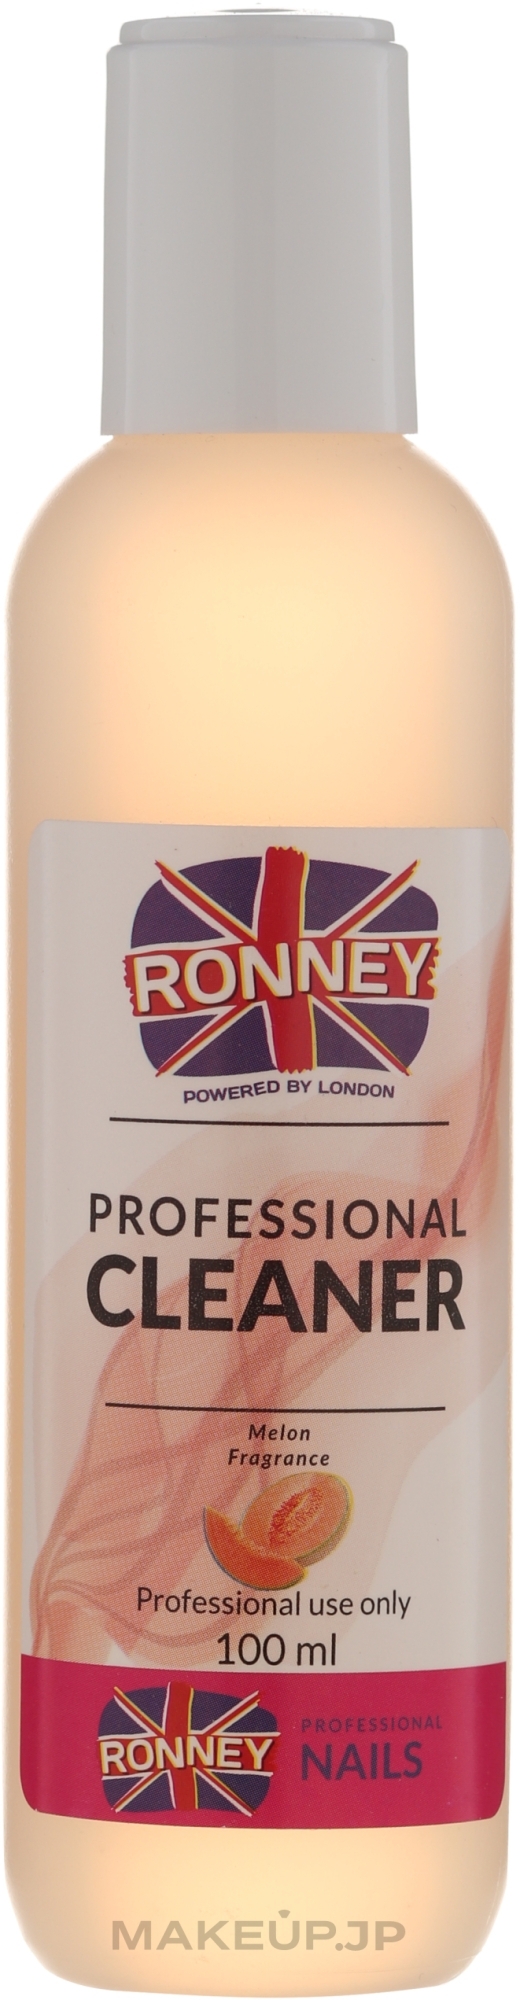 Nail Degreaser "Melon" - Ronney Professional Nail Cleaner Melon — photo 100 ml